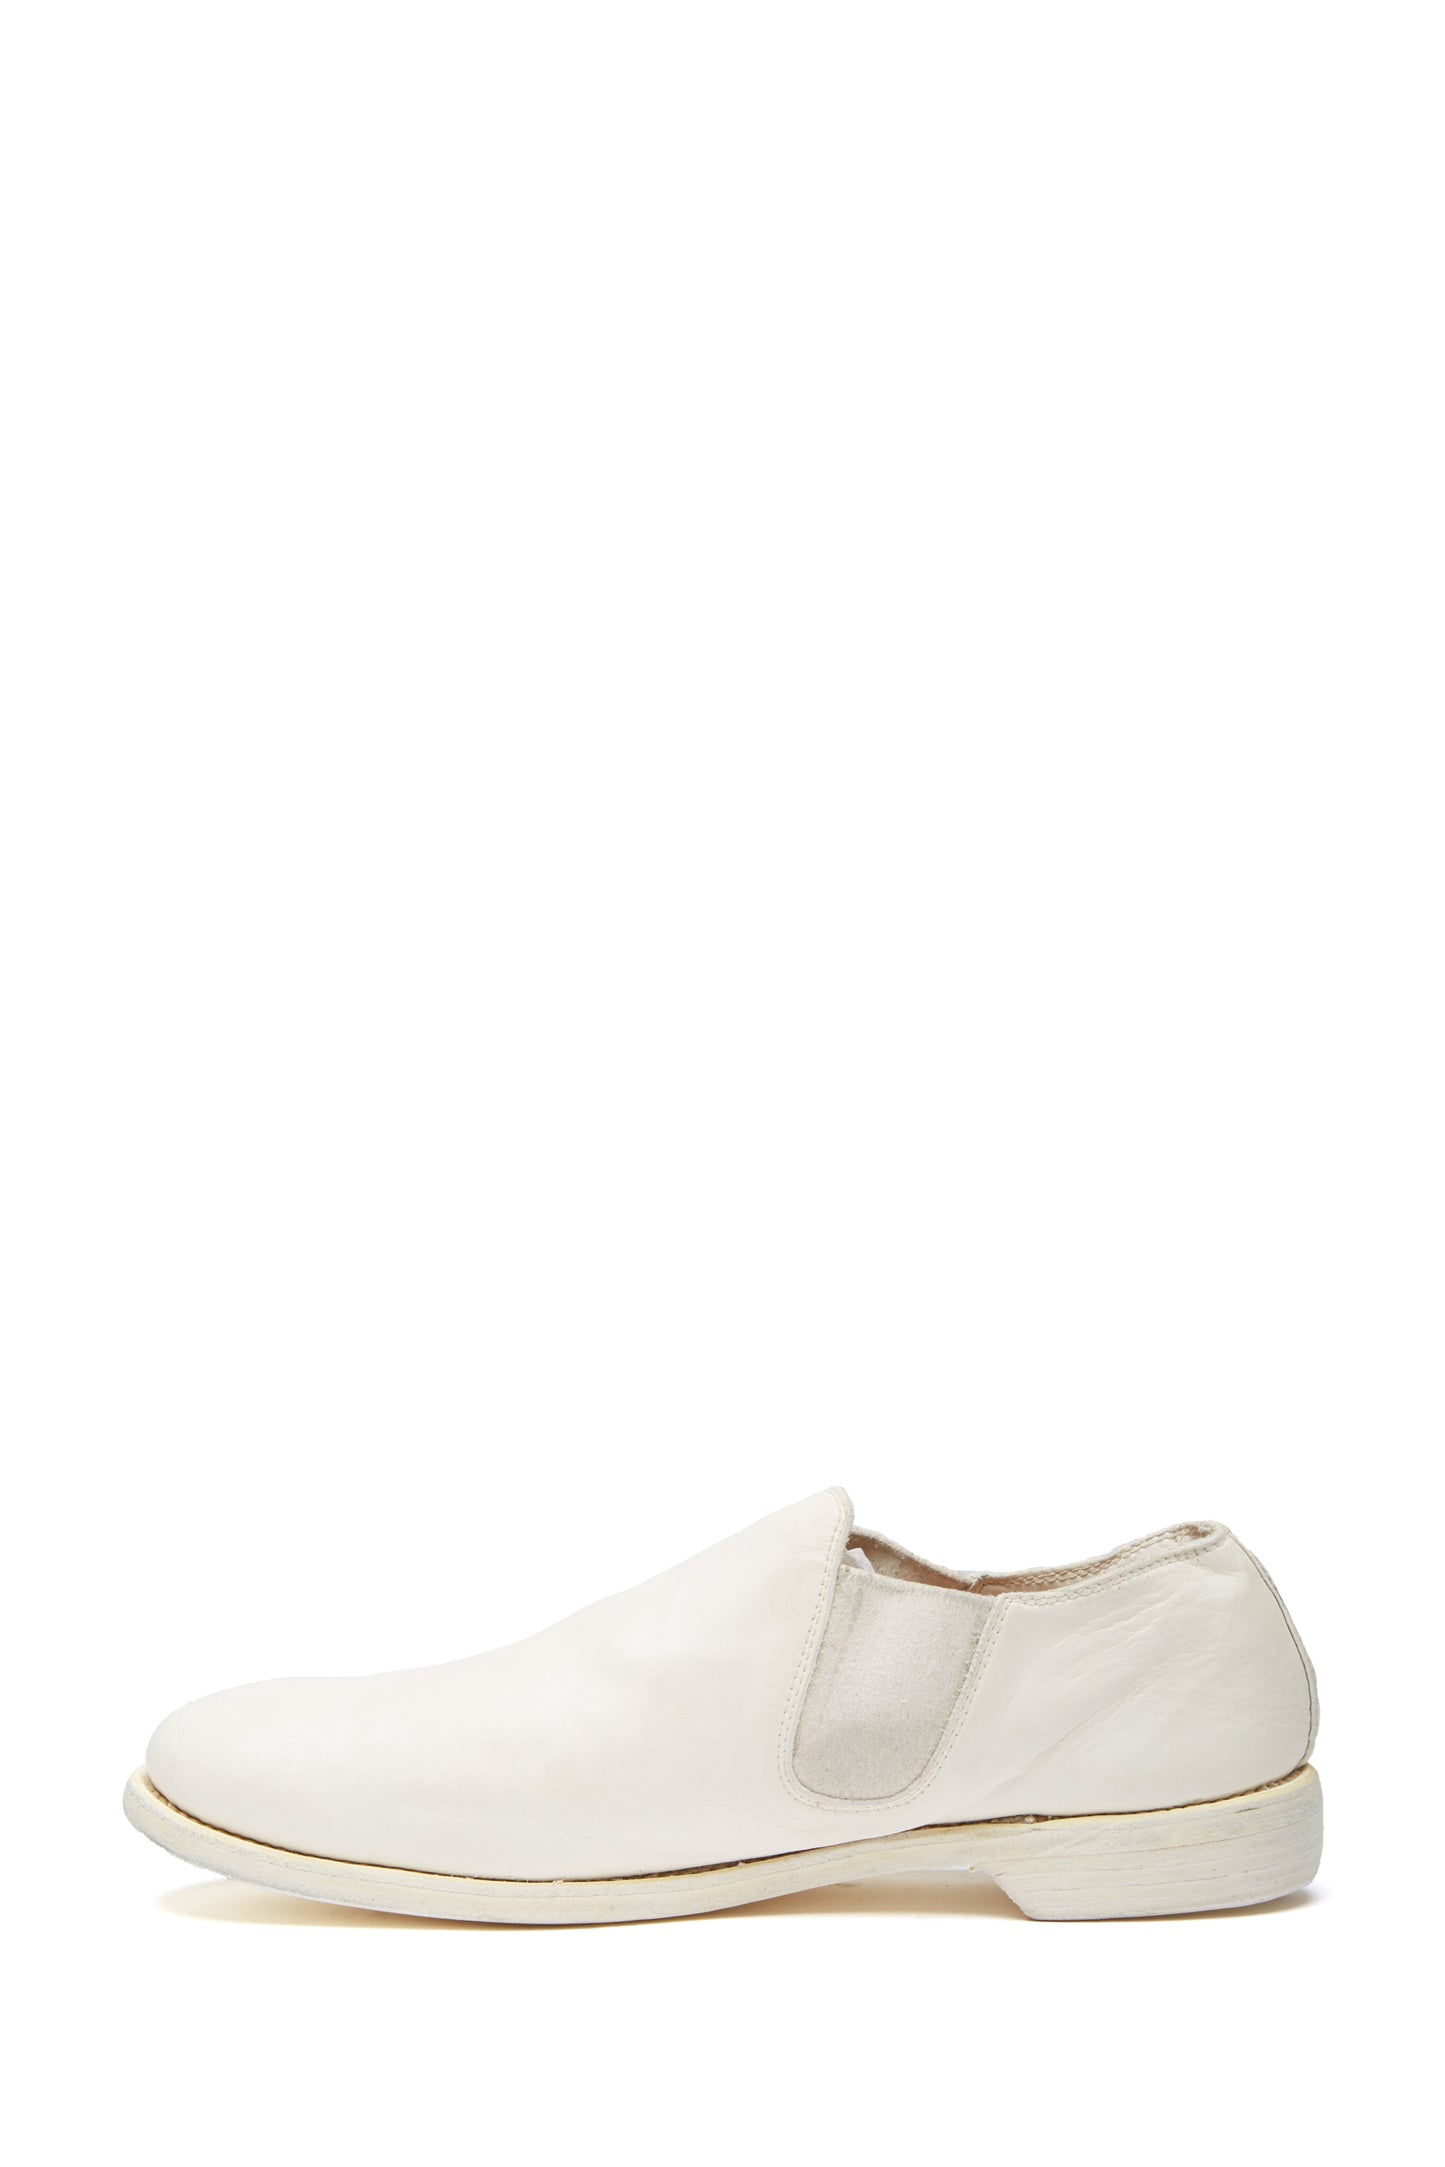 Guidi White Leather 109 Loafers